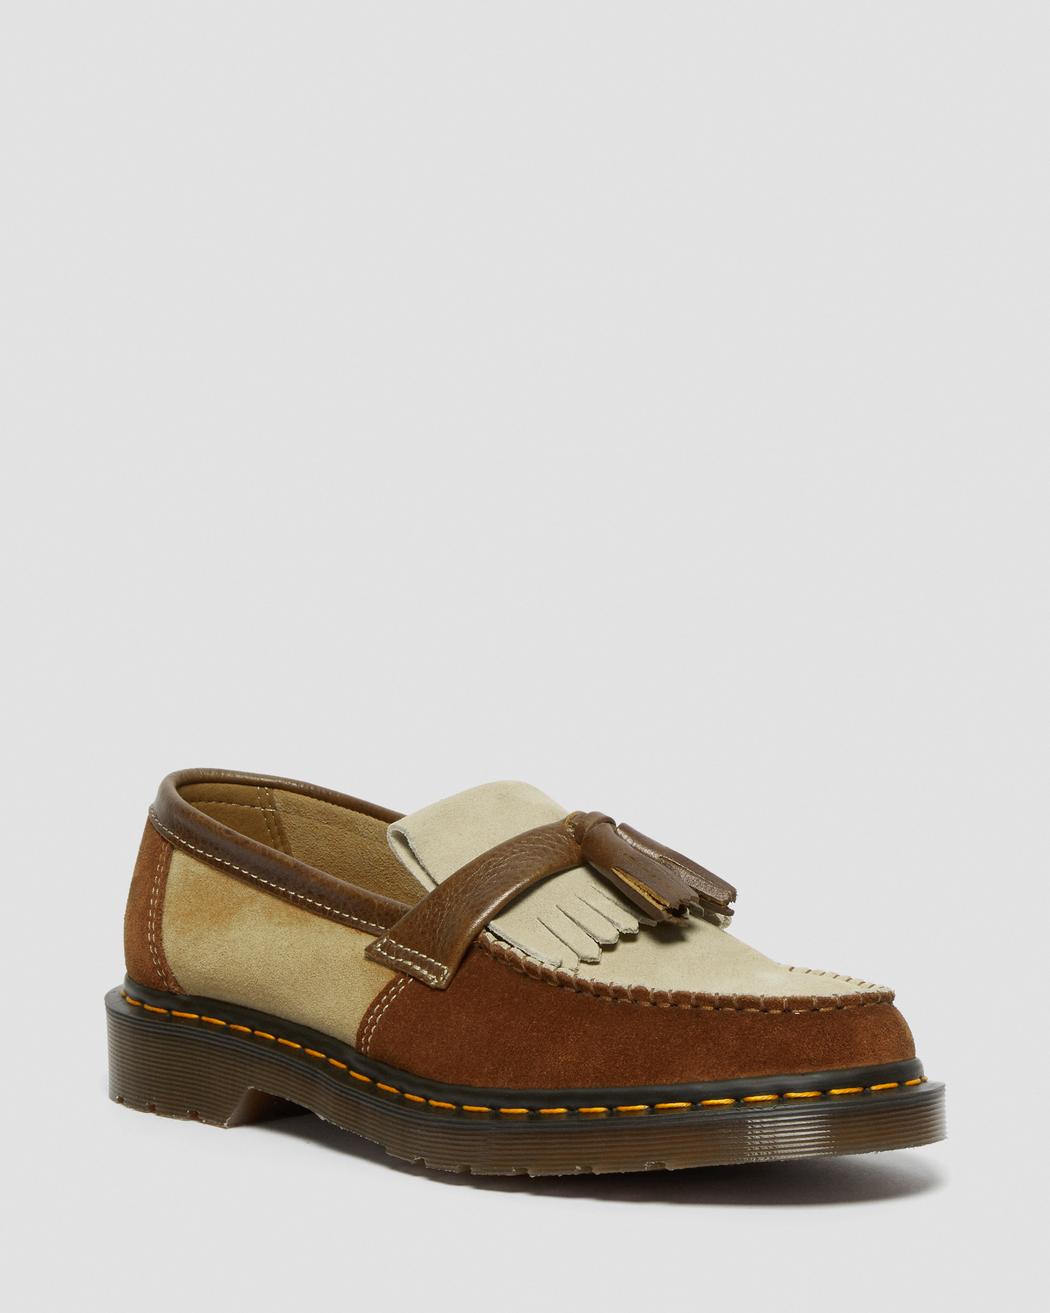 Adrian Made in England Suede Tassle Loafers | Dr. Martens